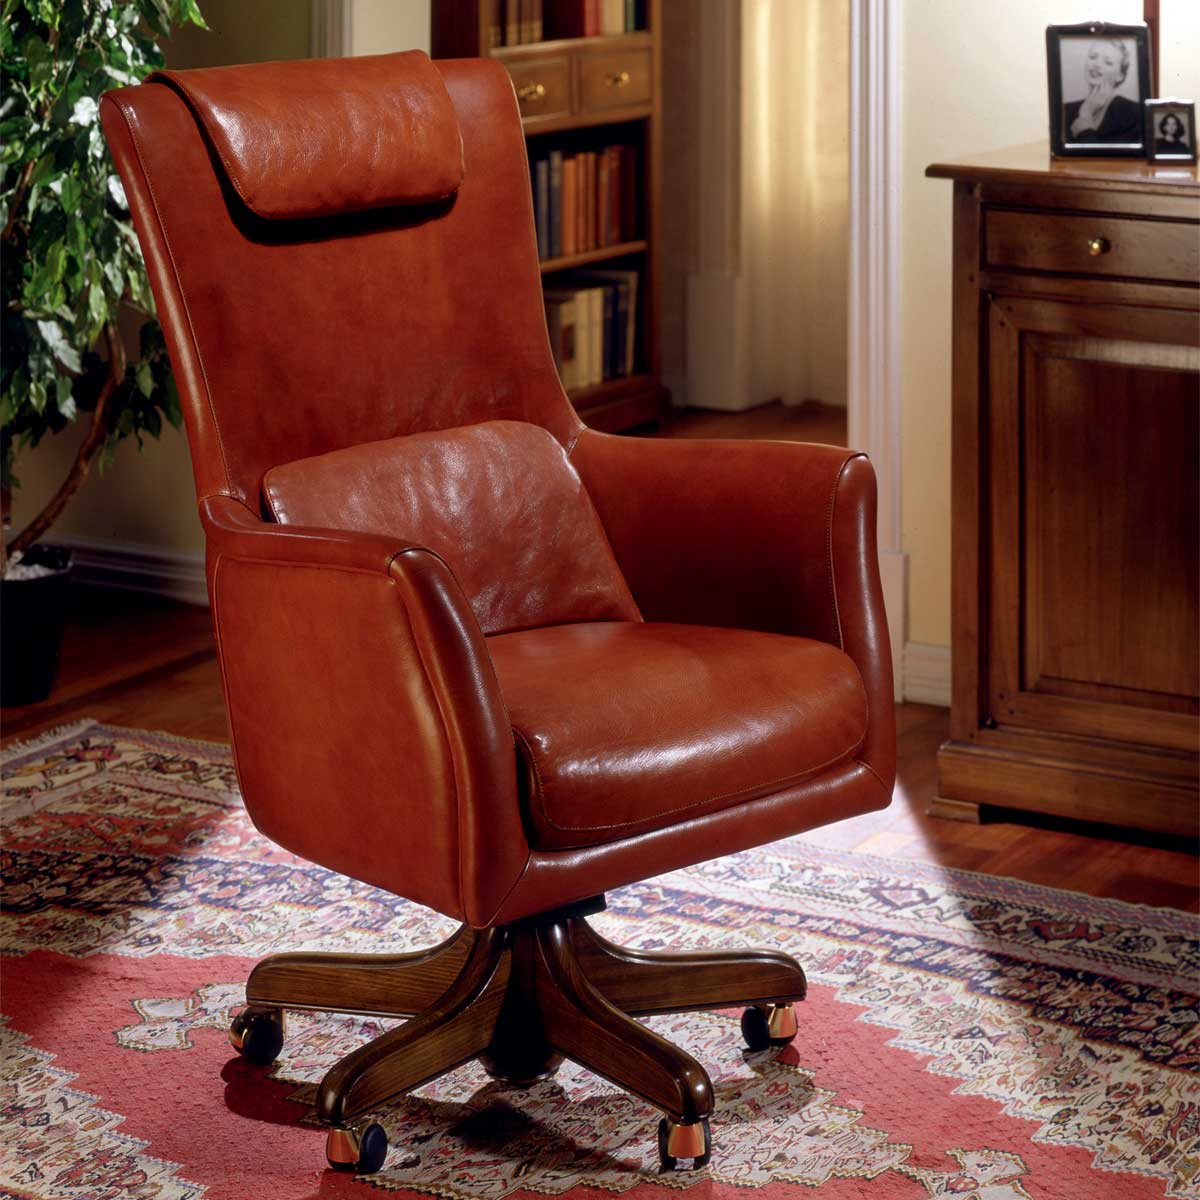 Office armchair "OBAMA"